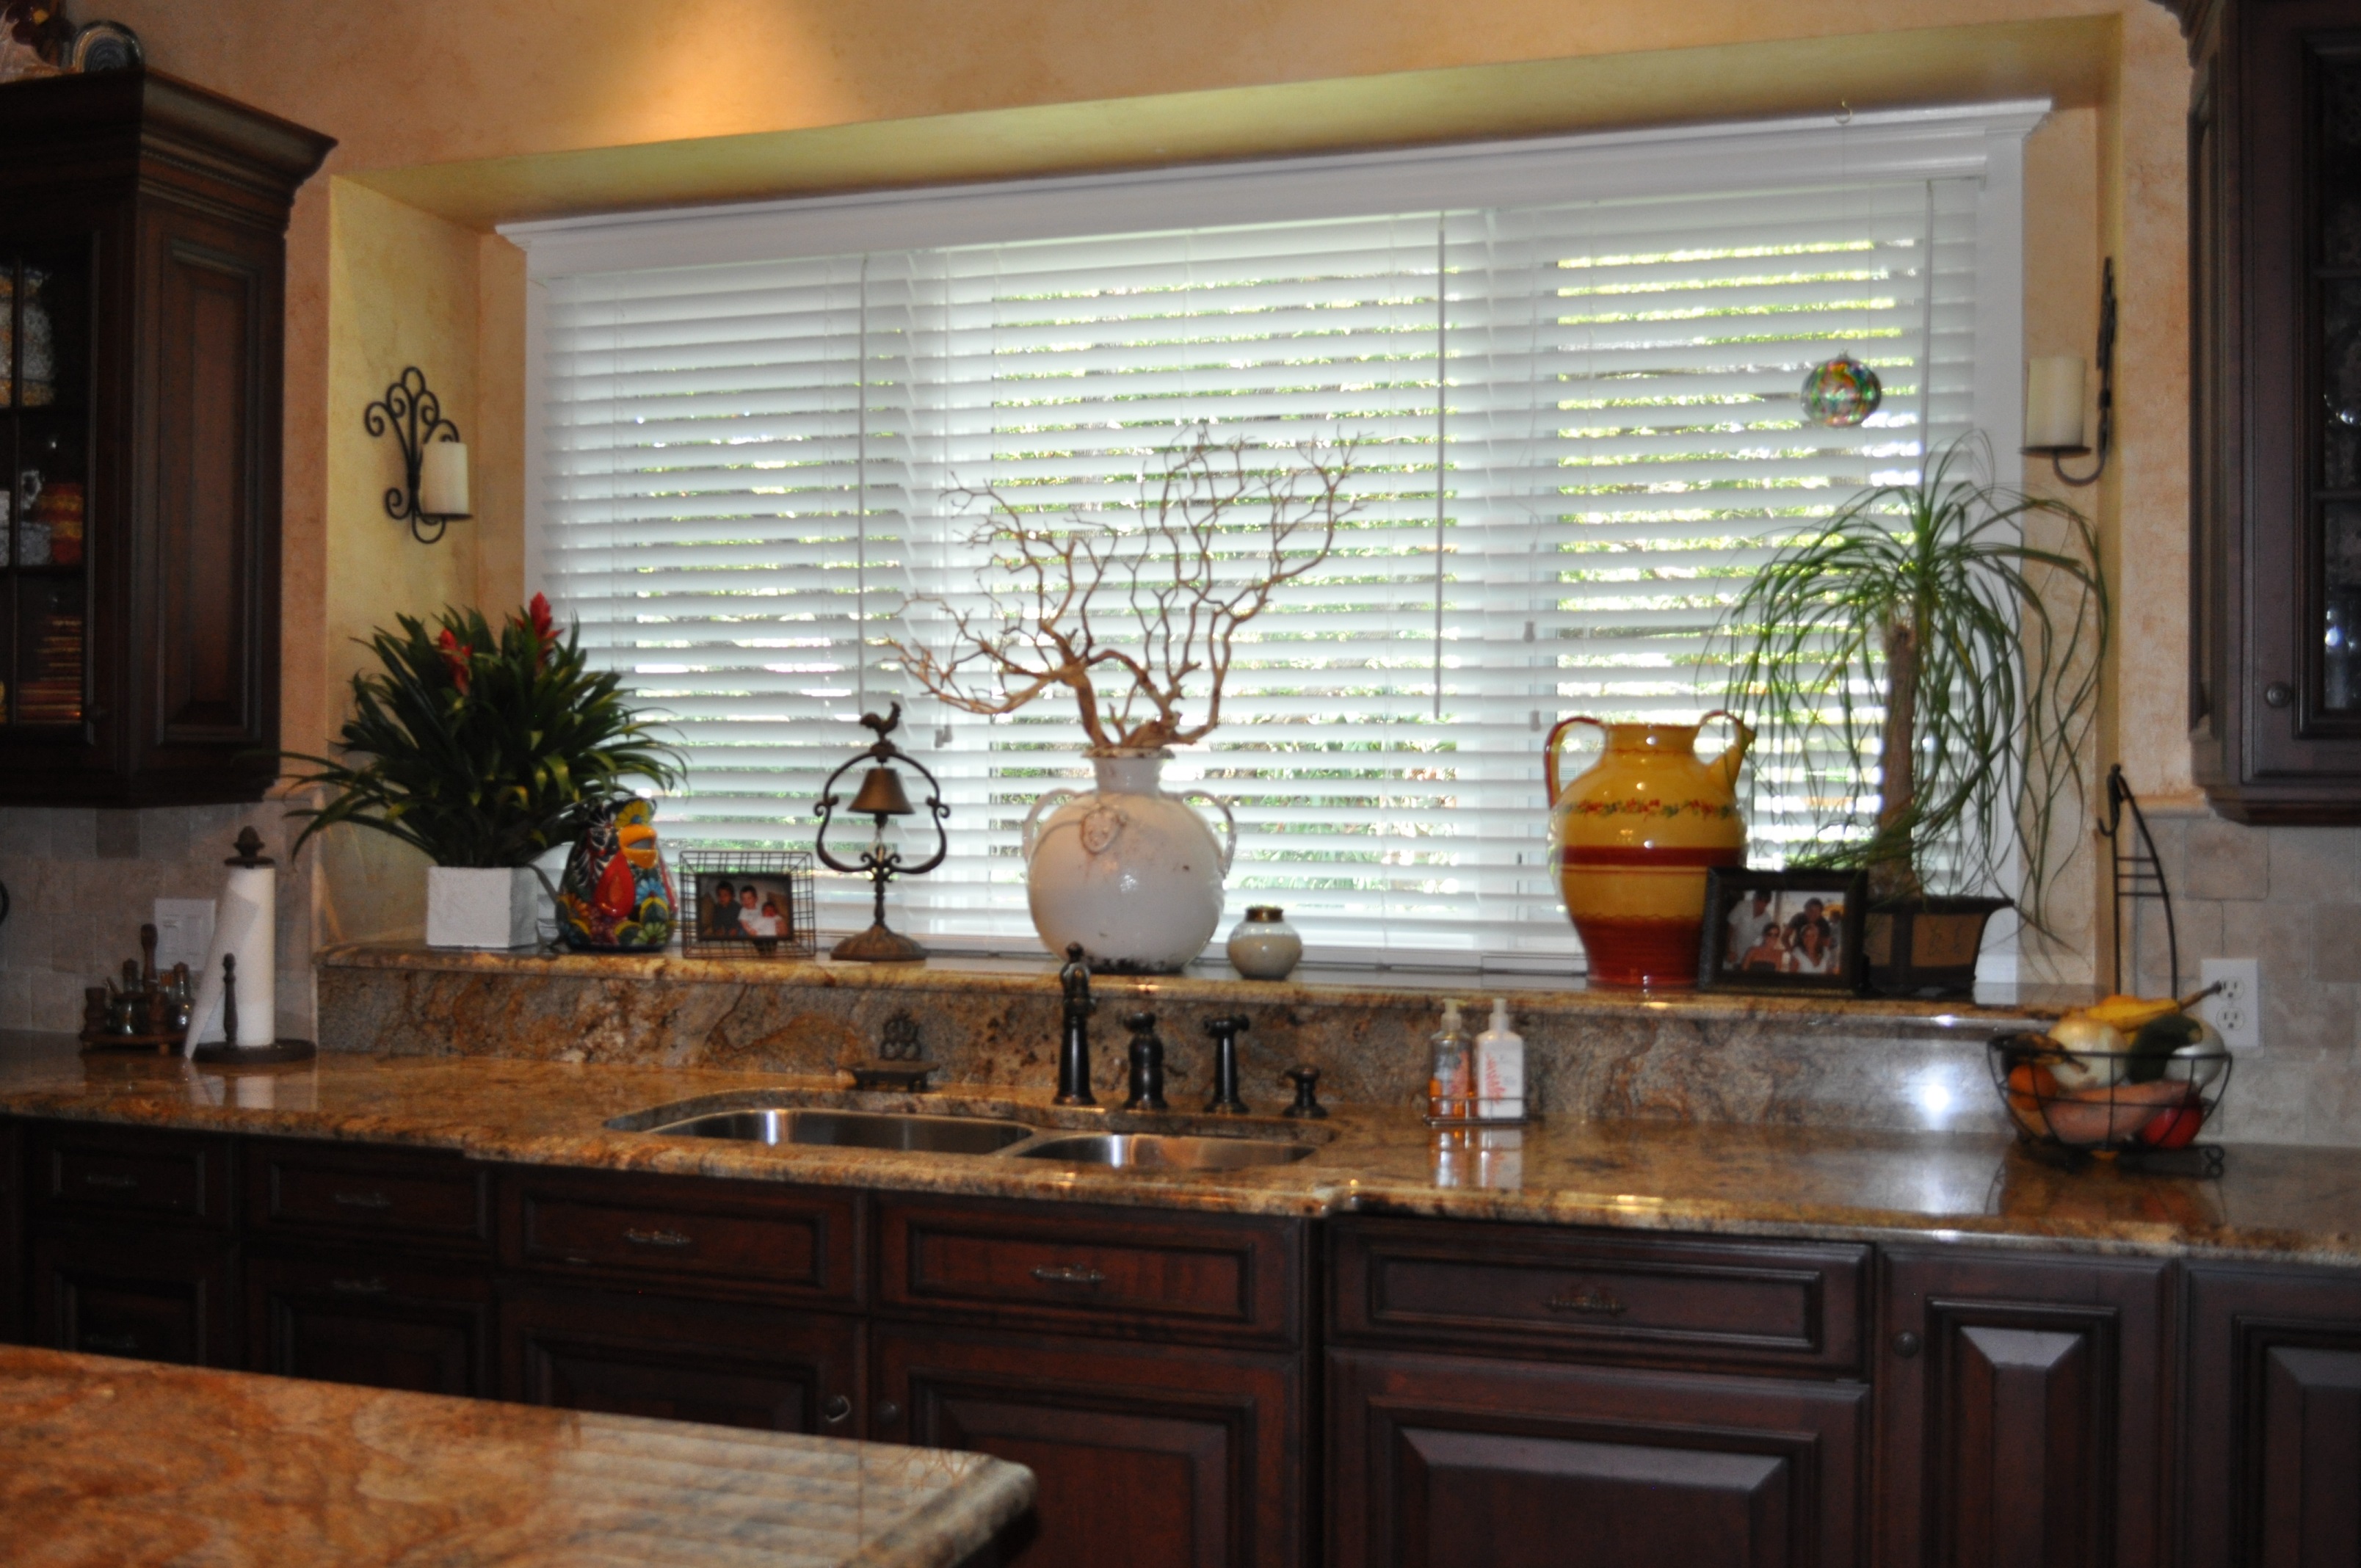 plantation shutters Brevard County, window blinds, roller shades